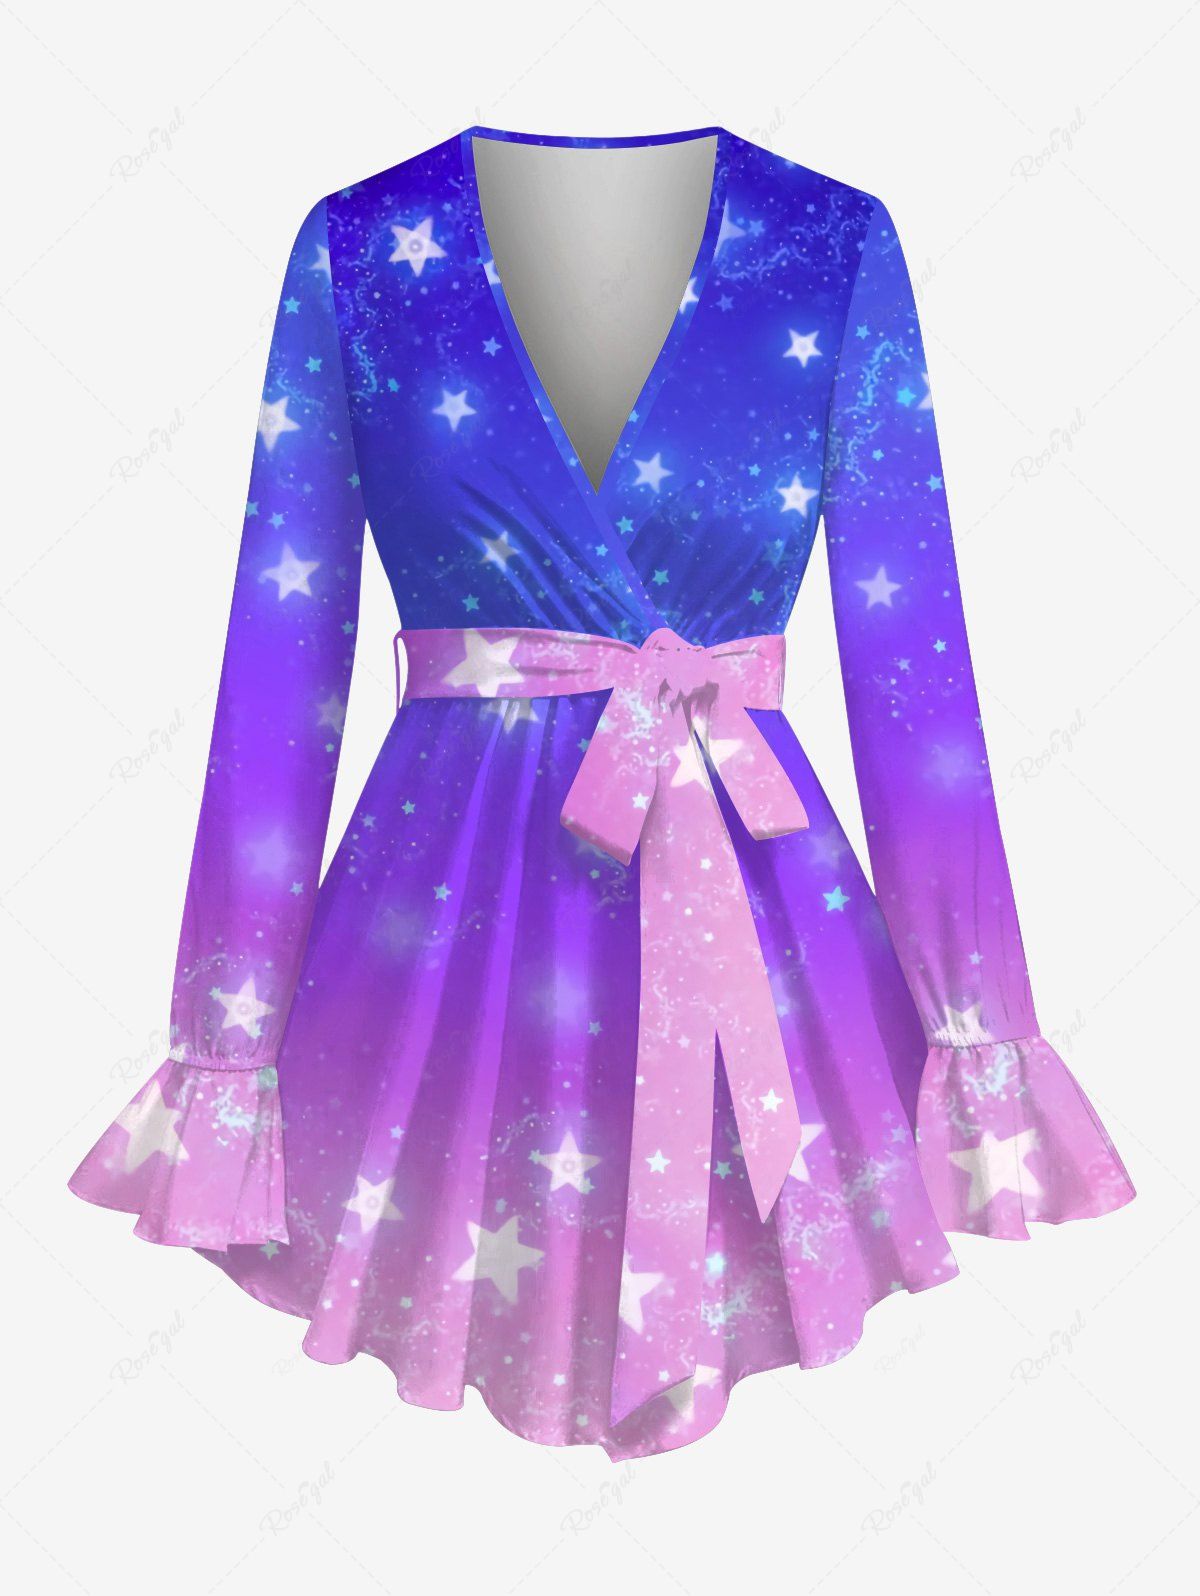 Outfit Plus Size Poet Sleeves Stars Galaxy Print Ombre Shirt with Removable Tied Belt  